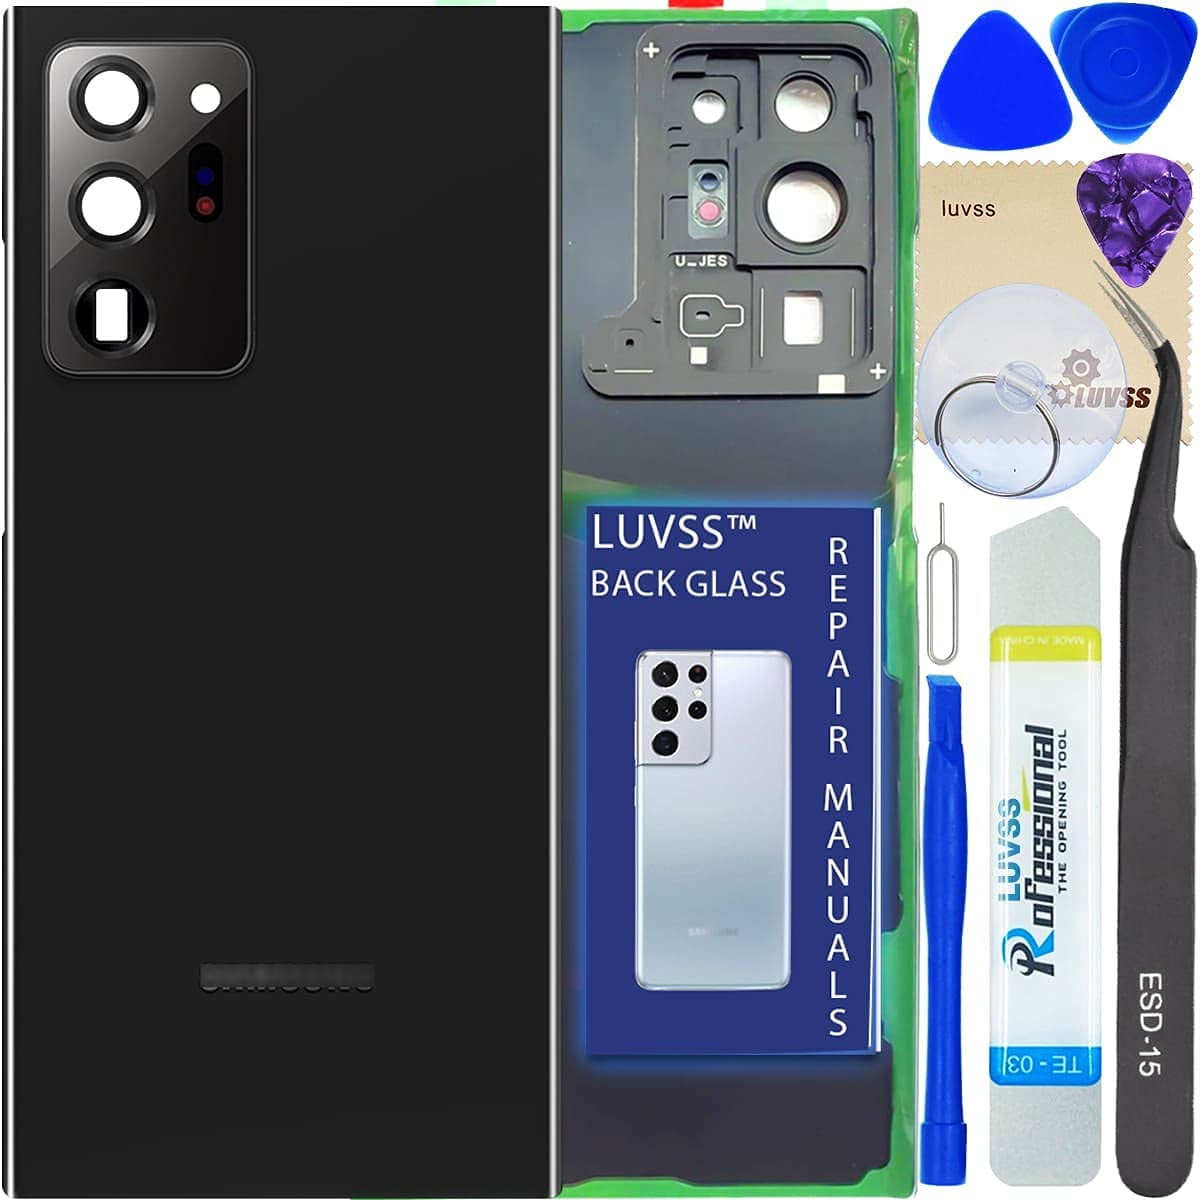 Midnight Black LUVSS Glass for Samsung Galaxy Note 8 SM-N950 Backing Glass Replacement Panel Cover Case Housing Camera Lens with Repair Manual DIY Tools Kit 